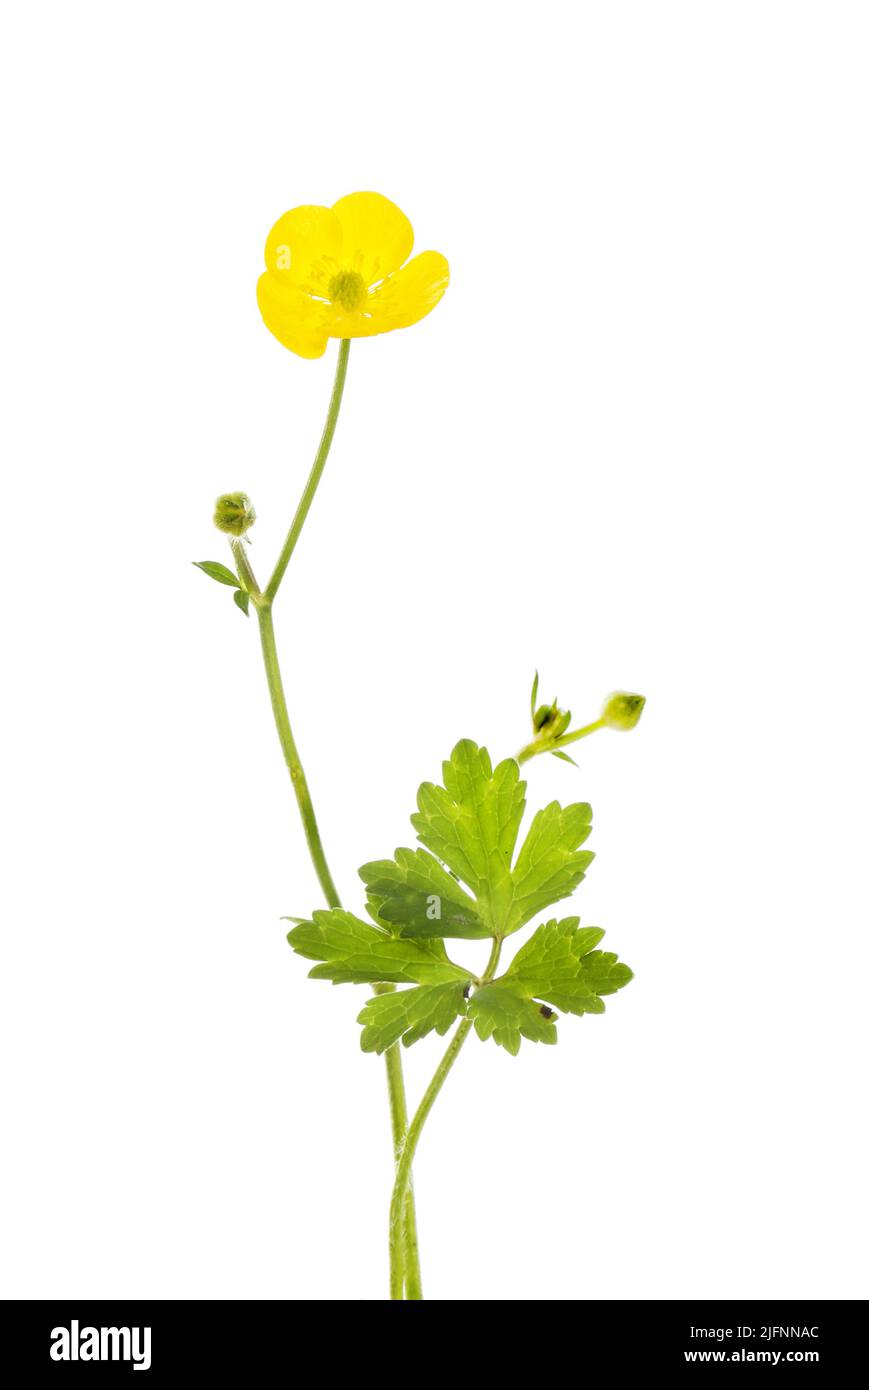 Bulbous buttercup, Ranunculus bulbosus, flower and foliage isolated against white Stock Photo